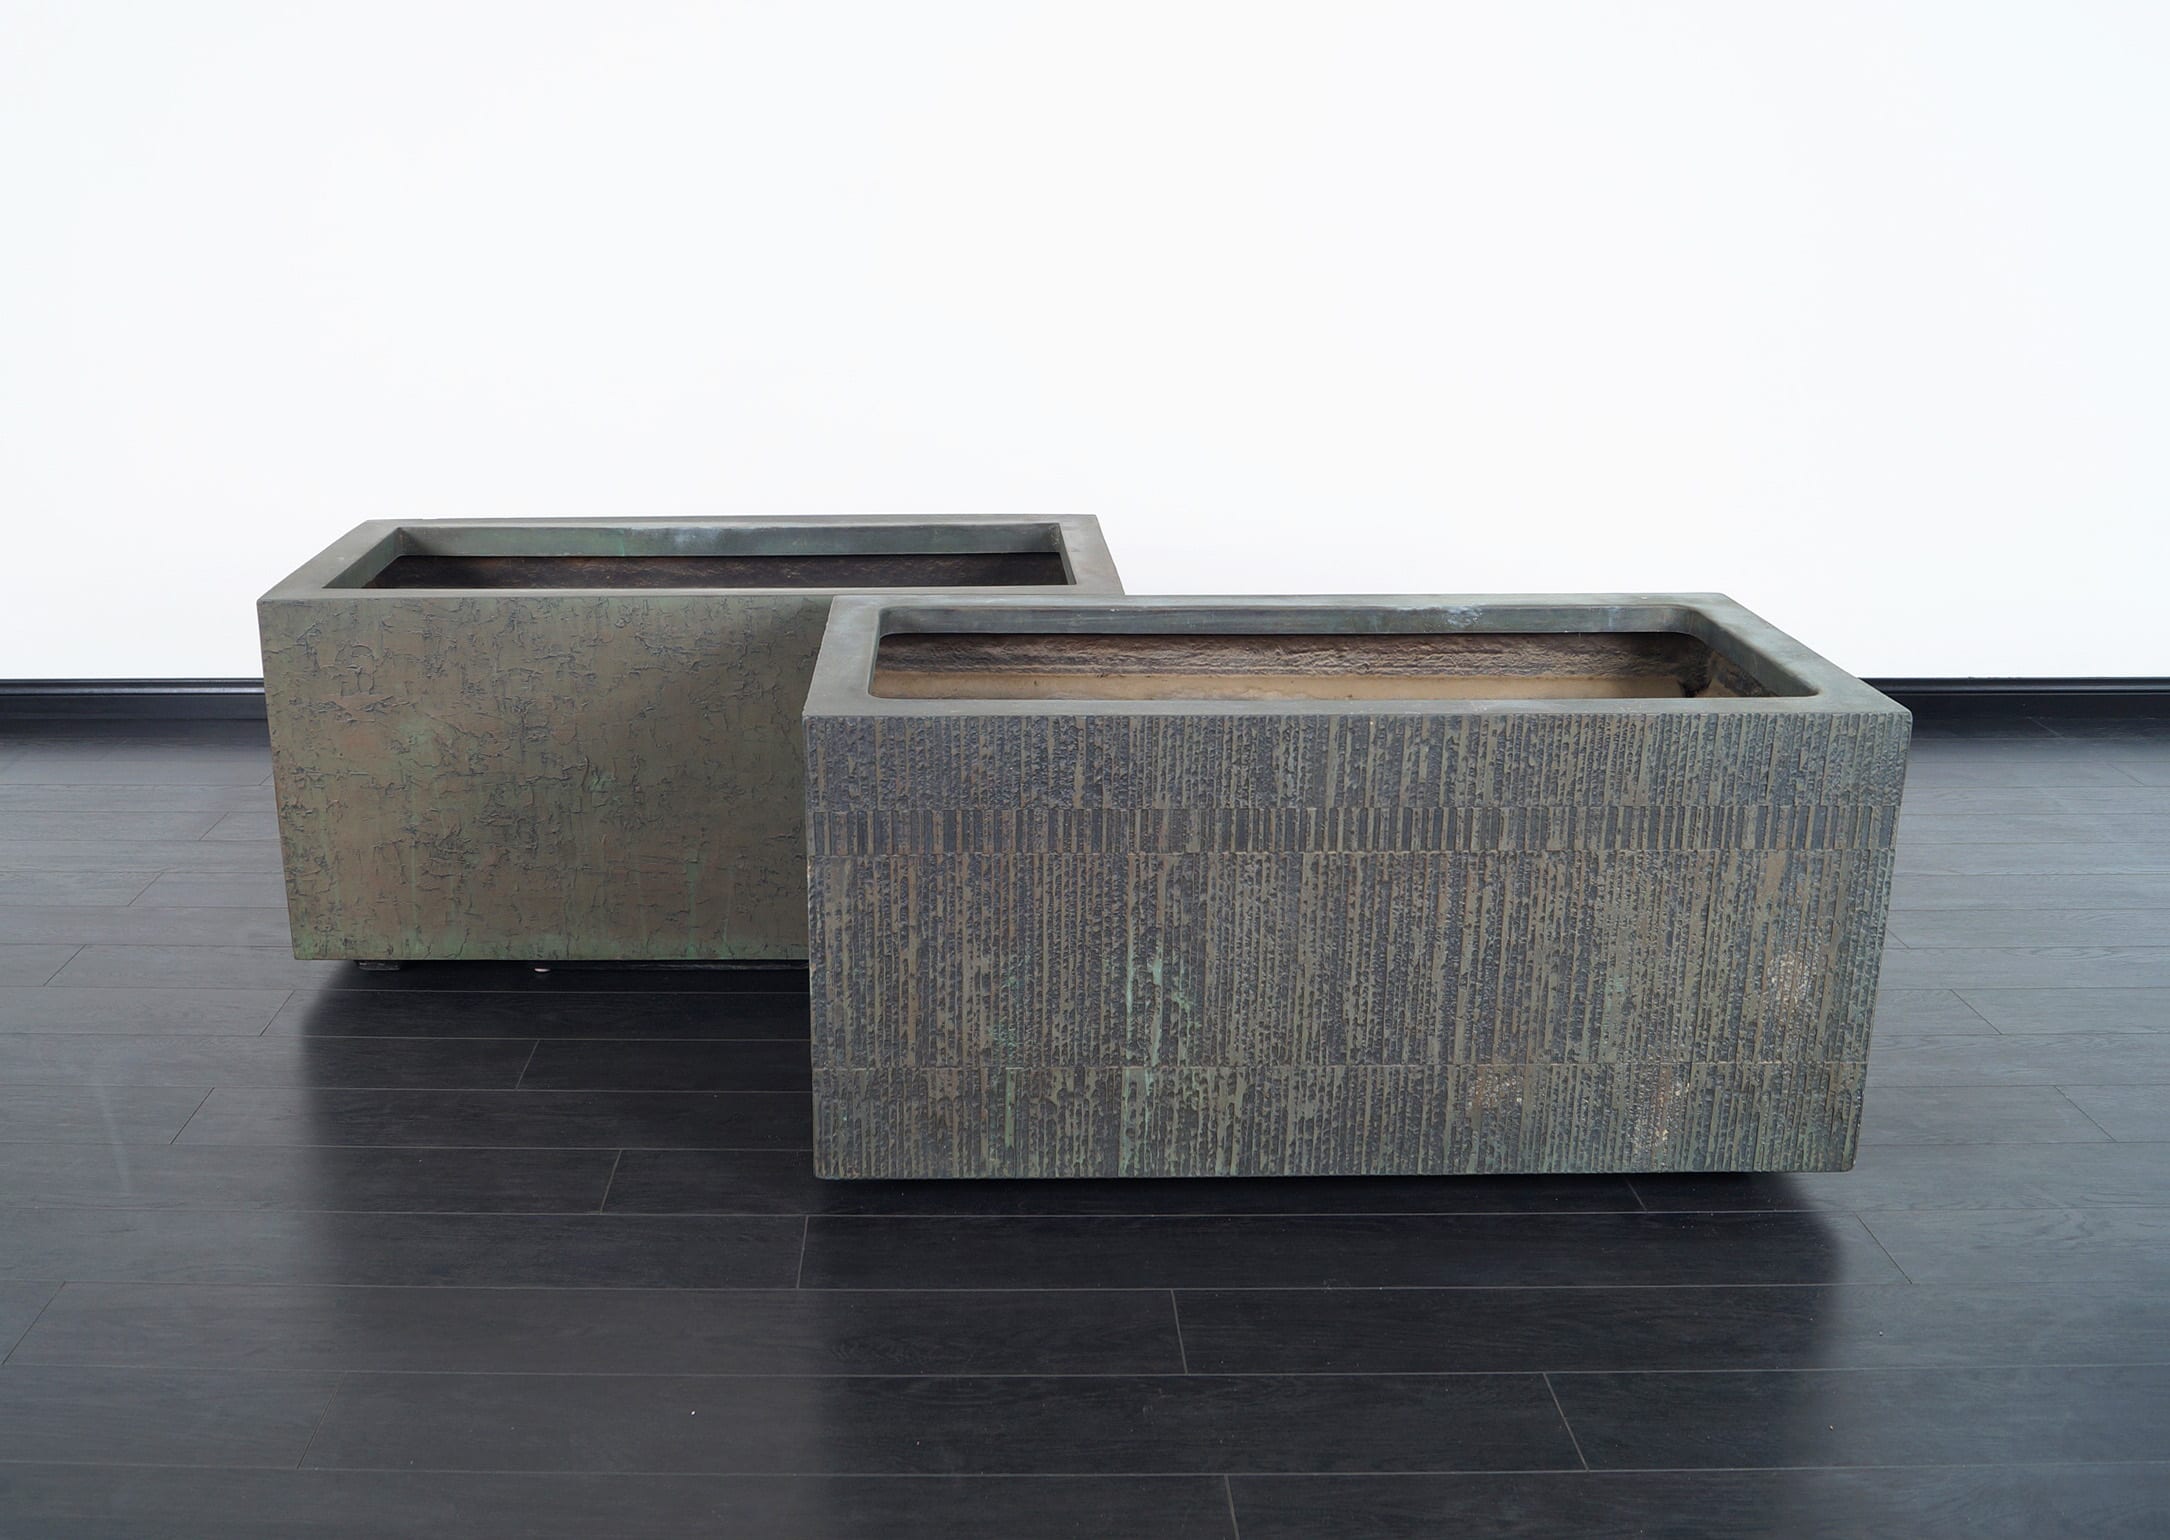 Architectural Cast Bronze Resin Planters by Forms and Surfaces